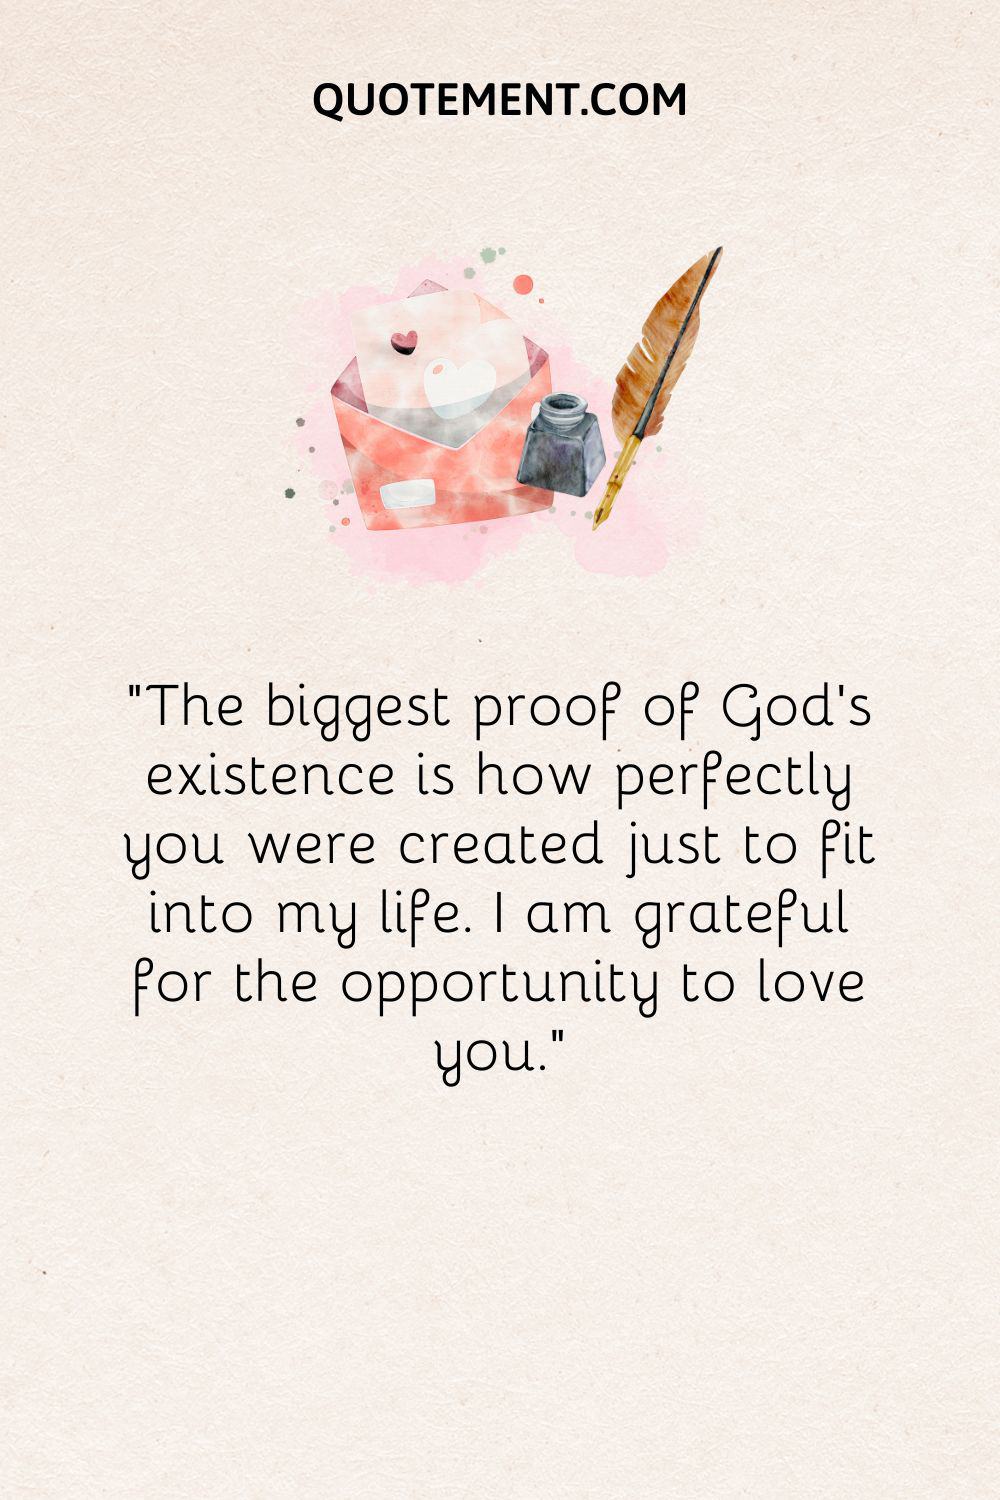 “The biggest proof of God’s existence is how perfectly you were created just to fit into my life. I am grateful for the opportunity to love you.”